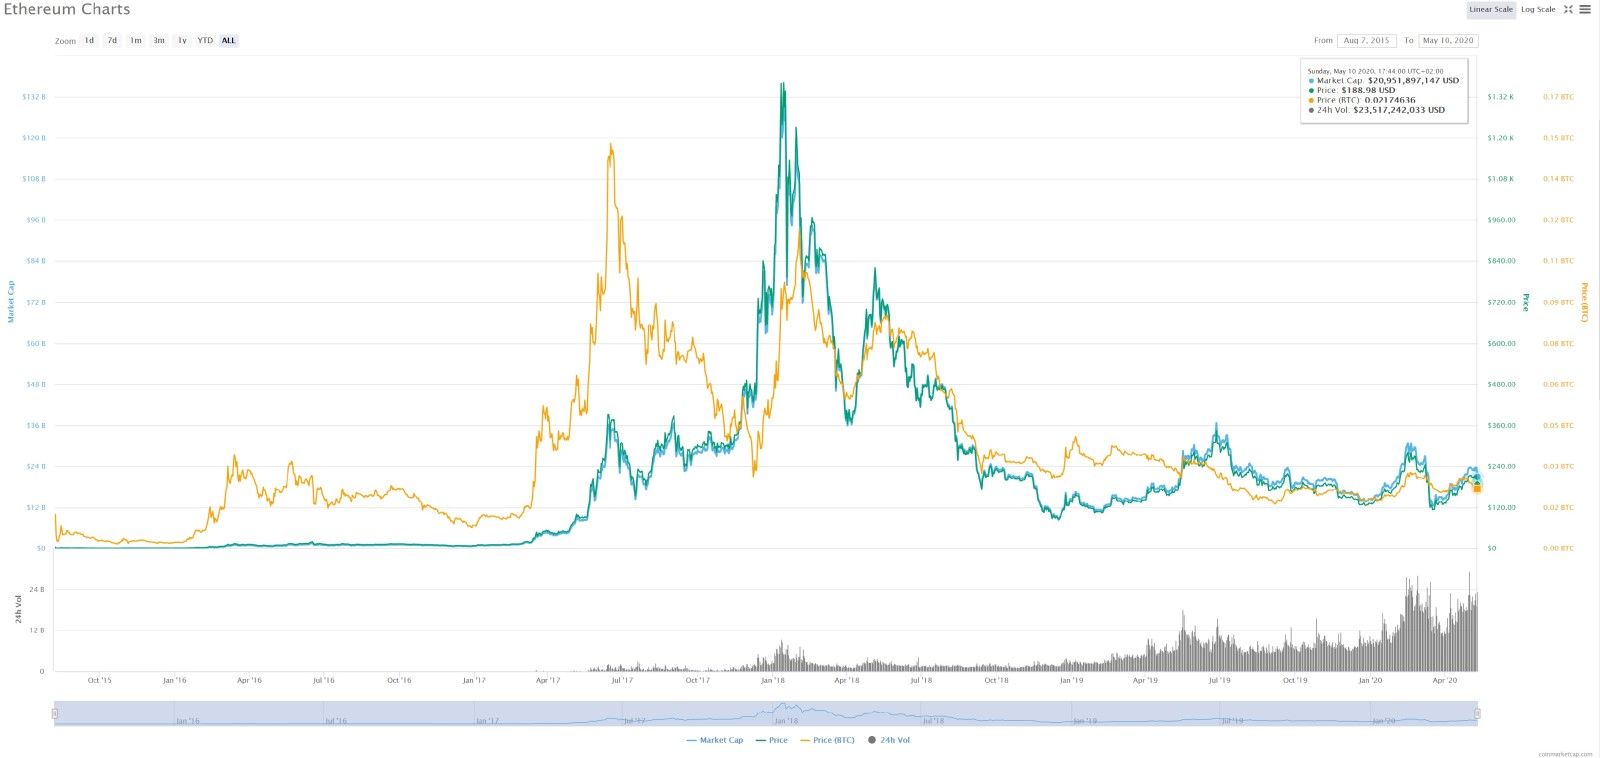 The price history of ETH, in USD and Bitcoin